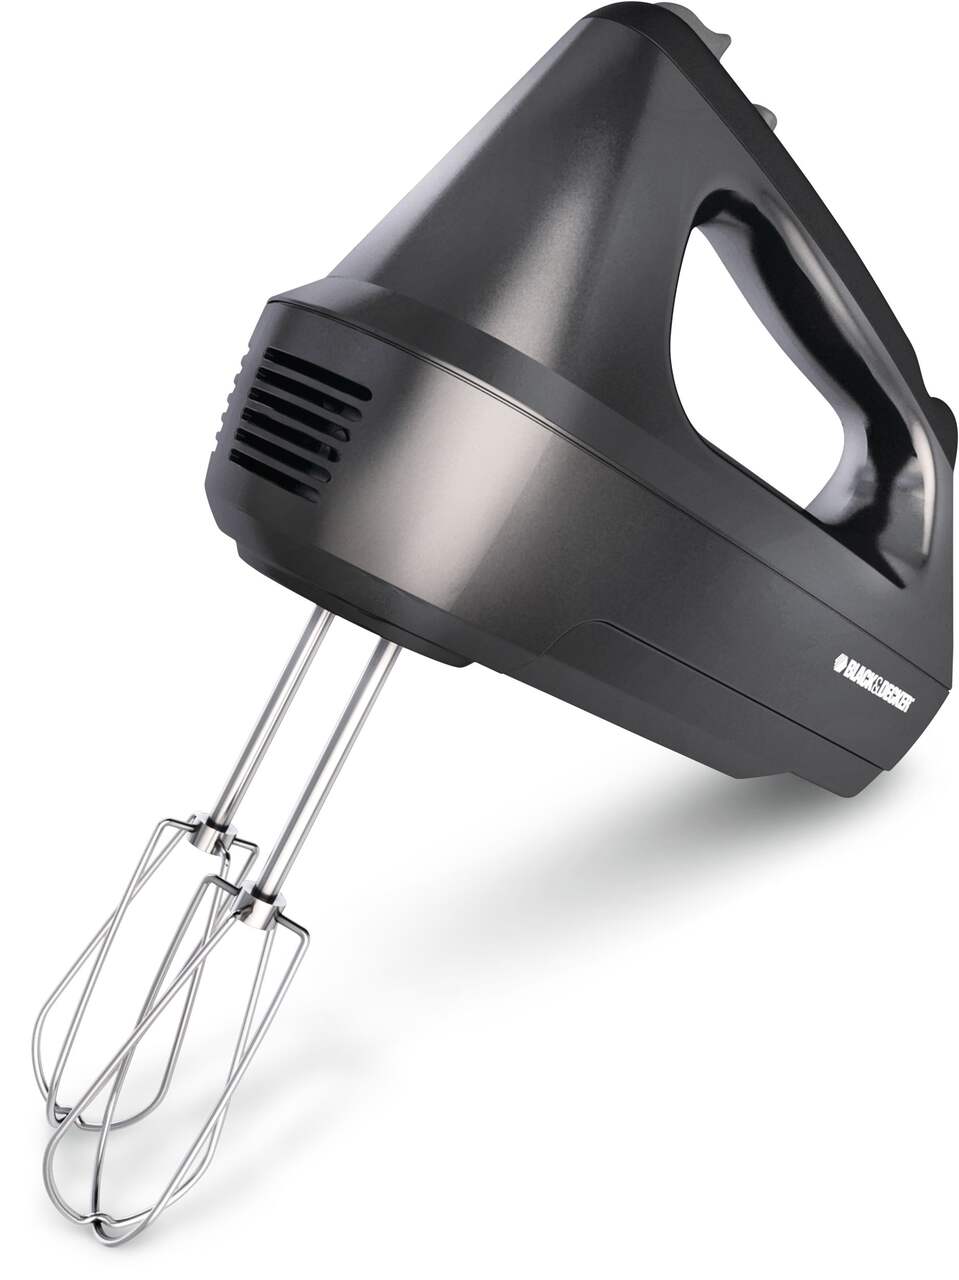 https://media-www.canadiantire.ca/product/living/kitchen/kitchen-appliances/0432195/b-d-6-speed-hand-mixer-with-storage-case-6541e754-f8aa-437c-8289-9ed5a3158f6b-jpgrendition.jpg?imdensity=1&imwidth=640&impolicy=mZoom